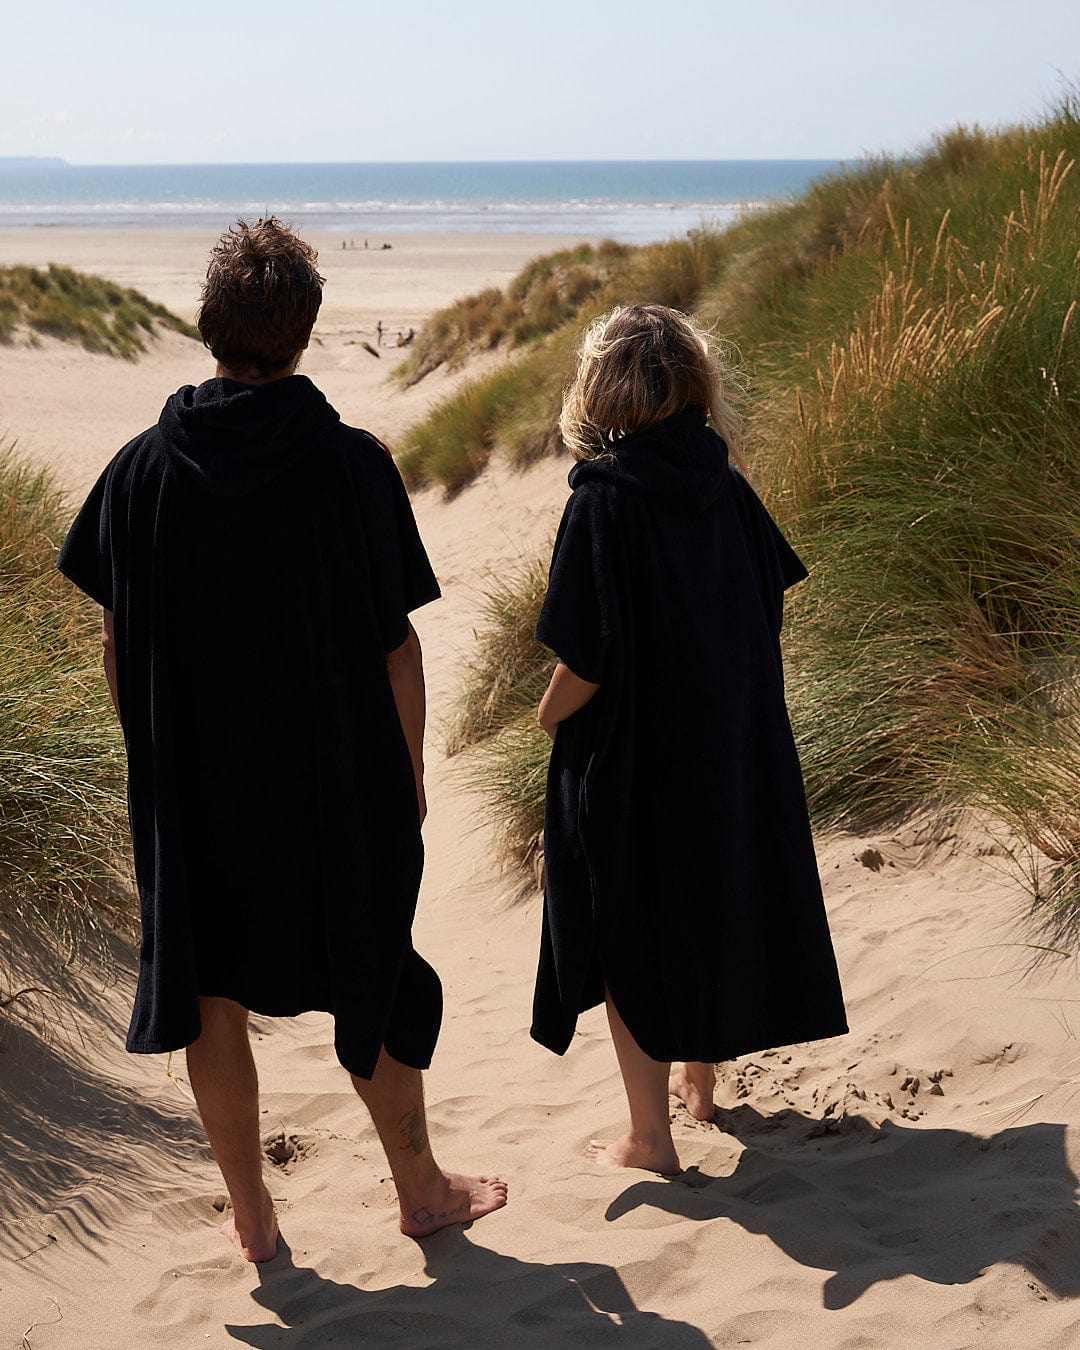 Two individuals wearing Saltrock Corp Changing Towel - Black robes walking on a sandy beach dune.